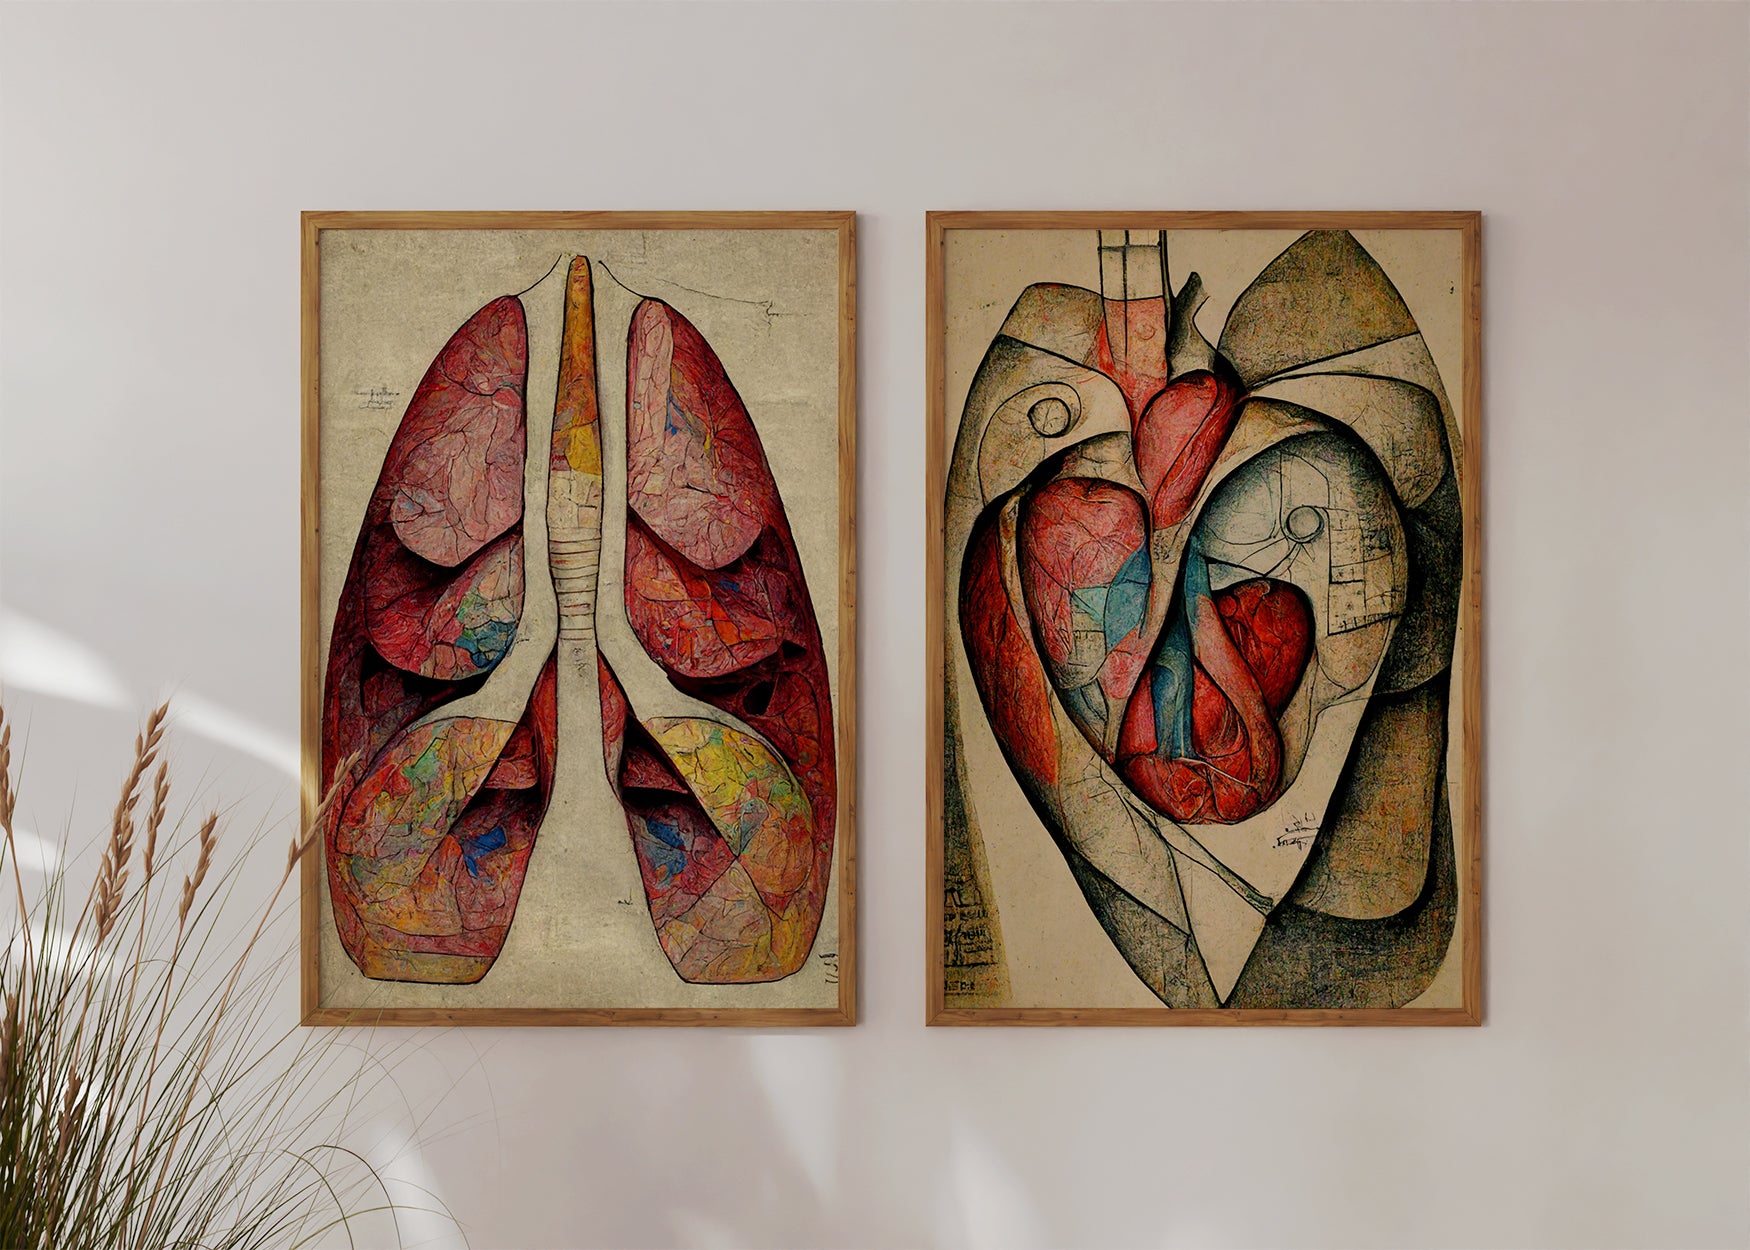 Respiratory System Art - Explore the intricate details of lungs anatomy through this visually stunning artwork, suitable for medical professionals and anatomy enthusiasts alike.